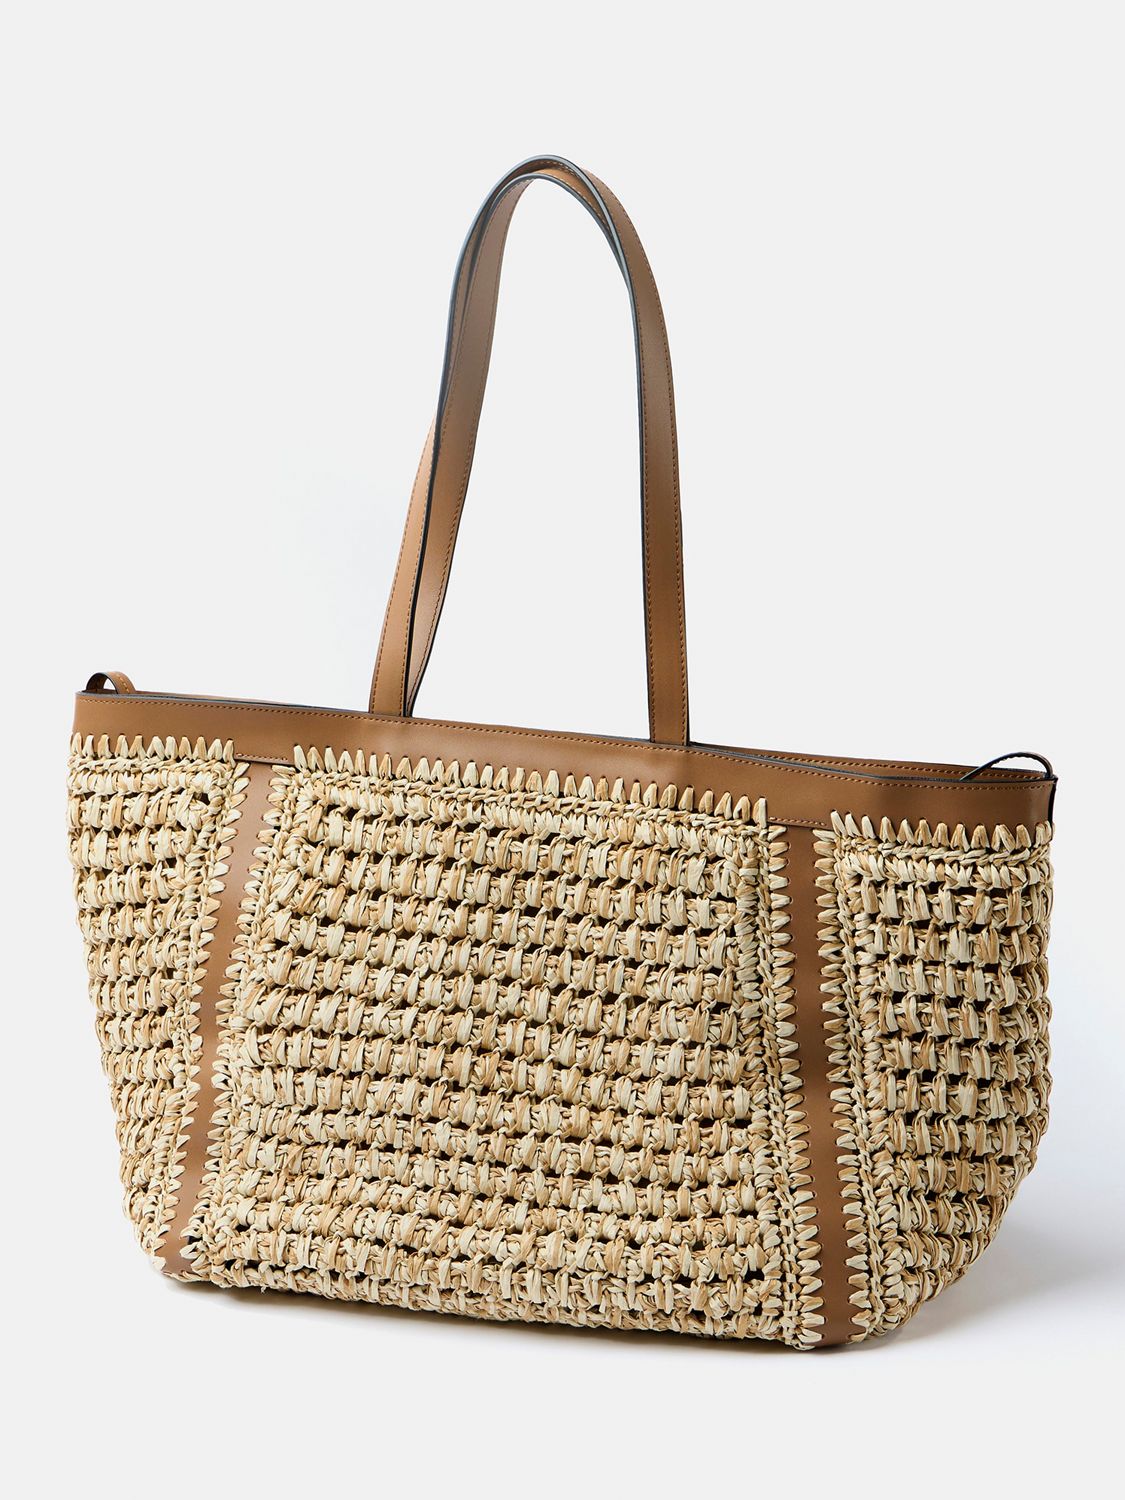 Mint Velvet Woven Tote Bag, Brown Tan, One Size